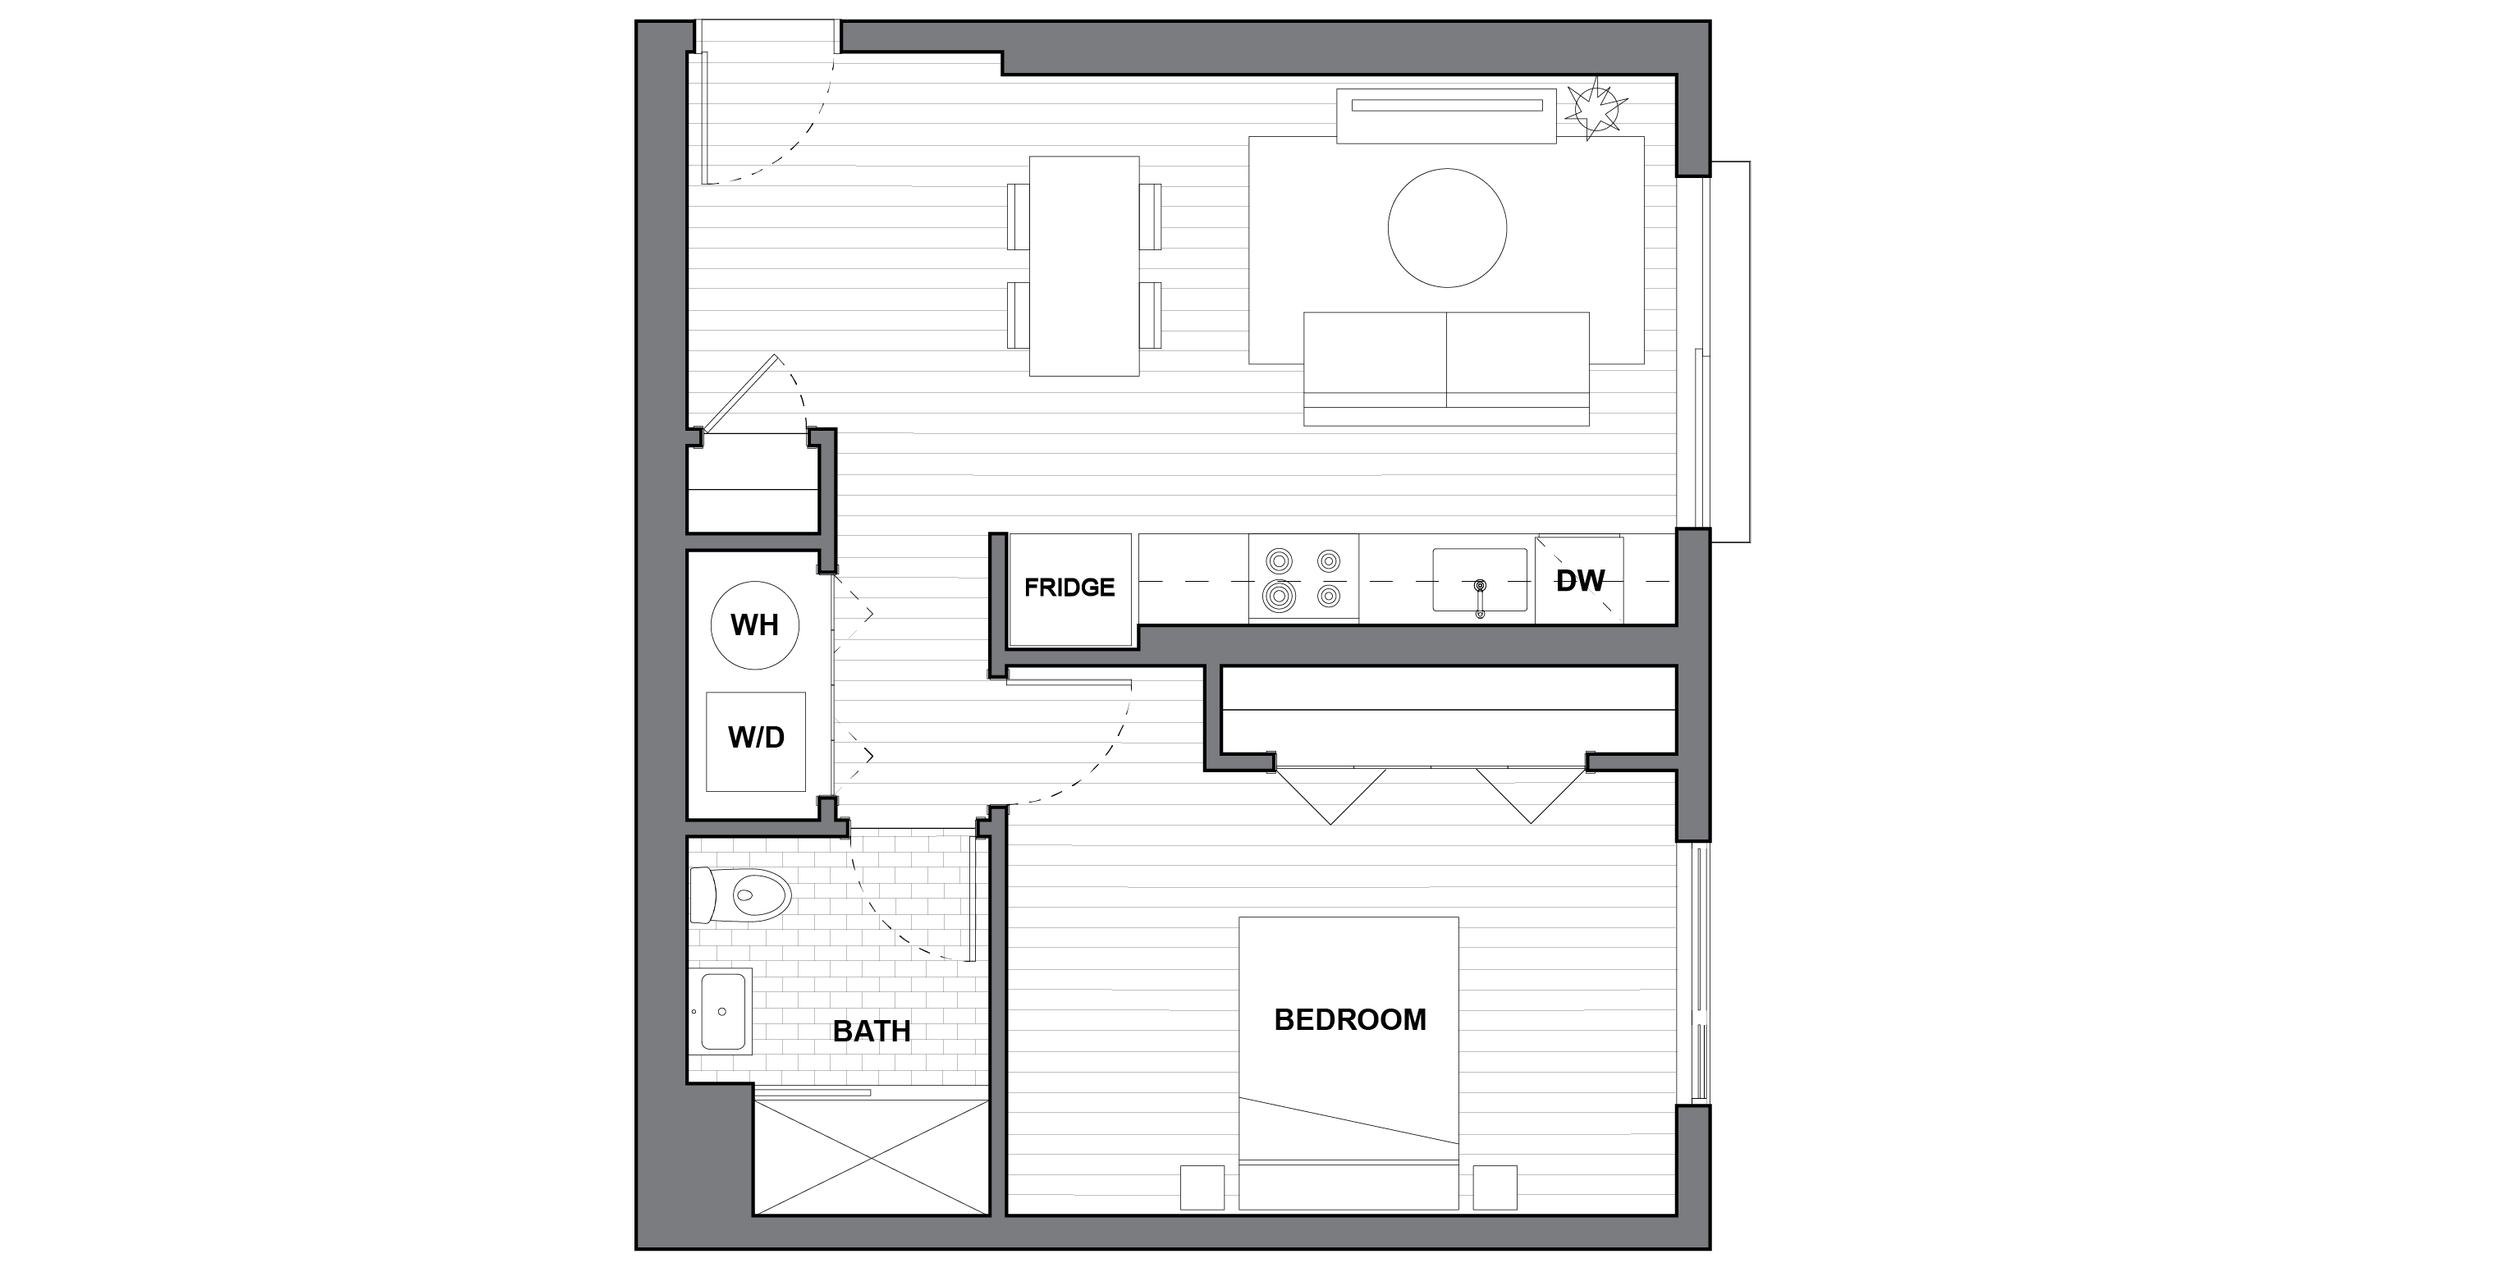   UNIT 302  1 BEDROOM / 1 BATH 663 SQUARE FEET   REQUEST INFORMATION / APPLY FOR THIS UNIT   